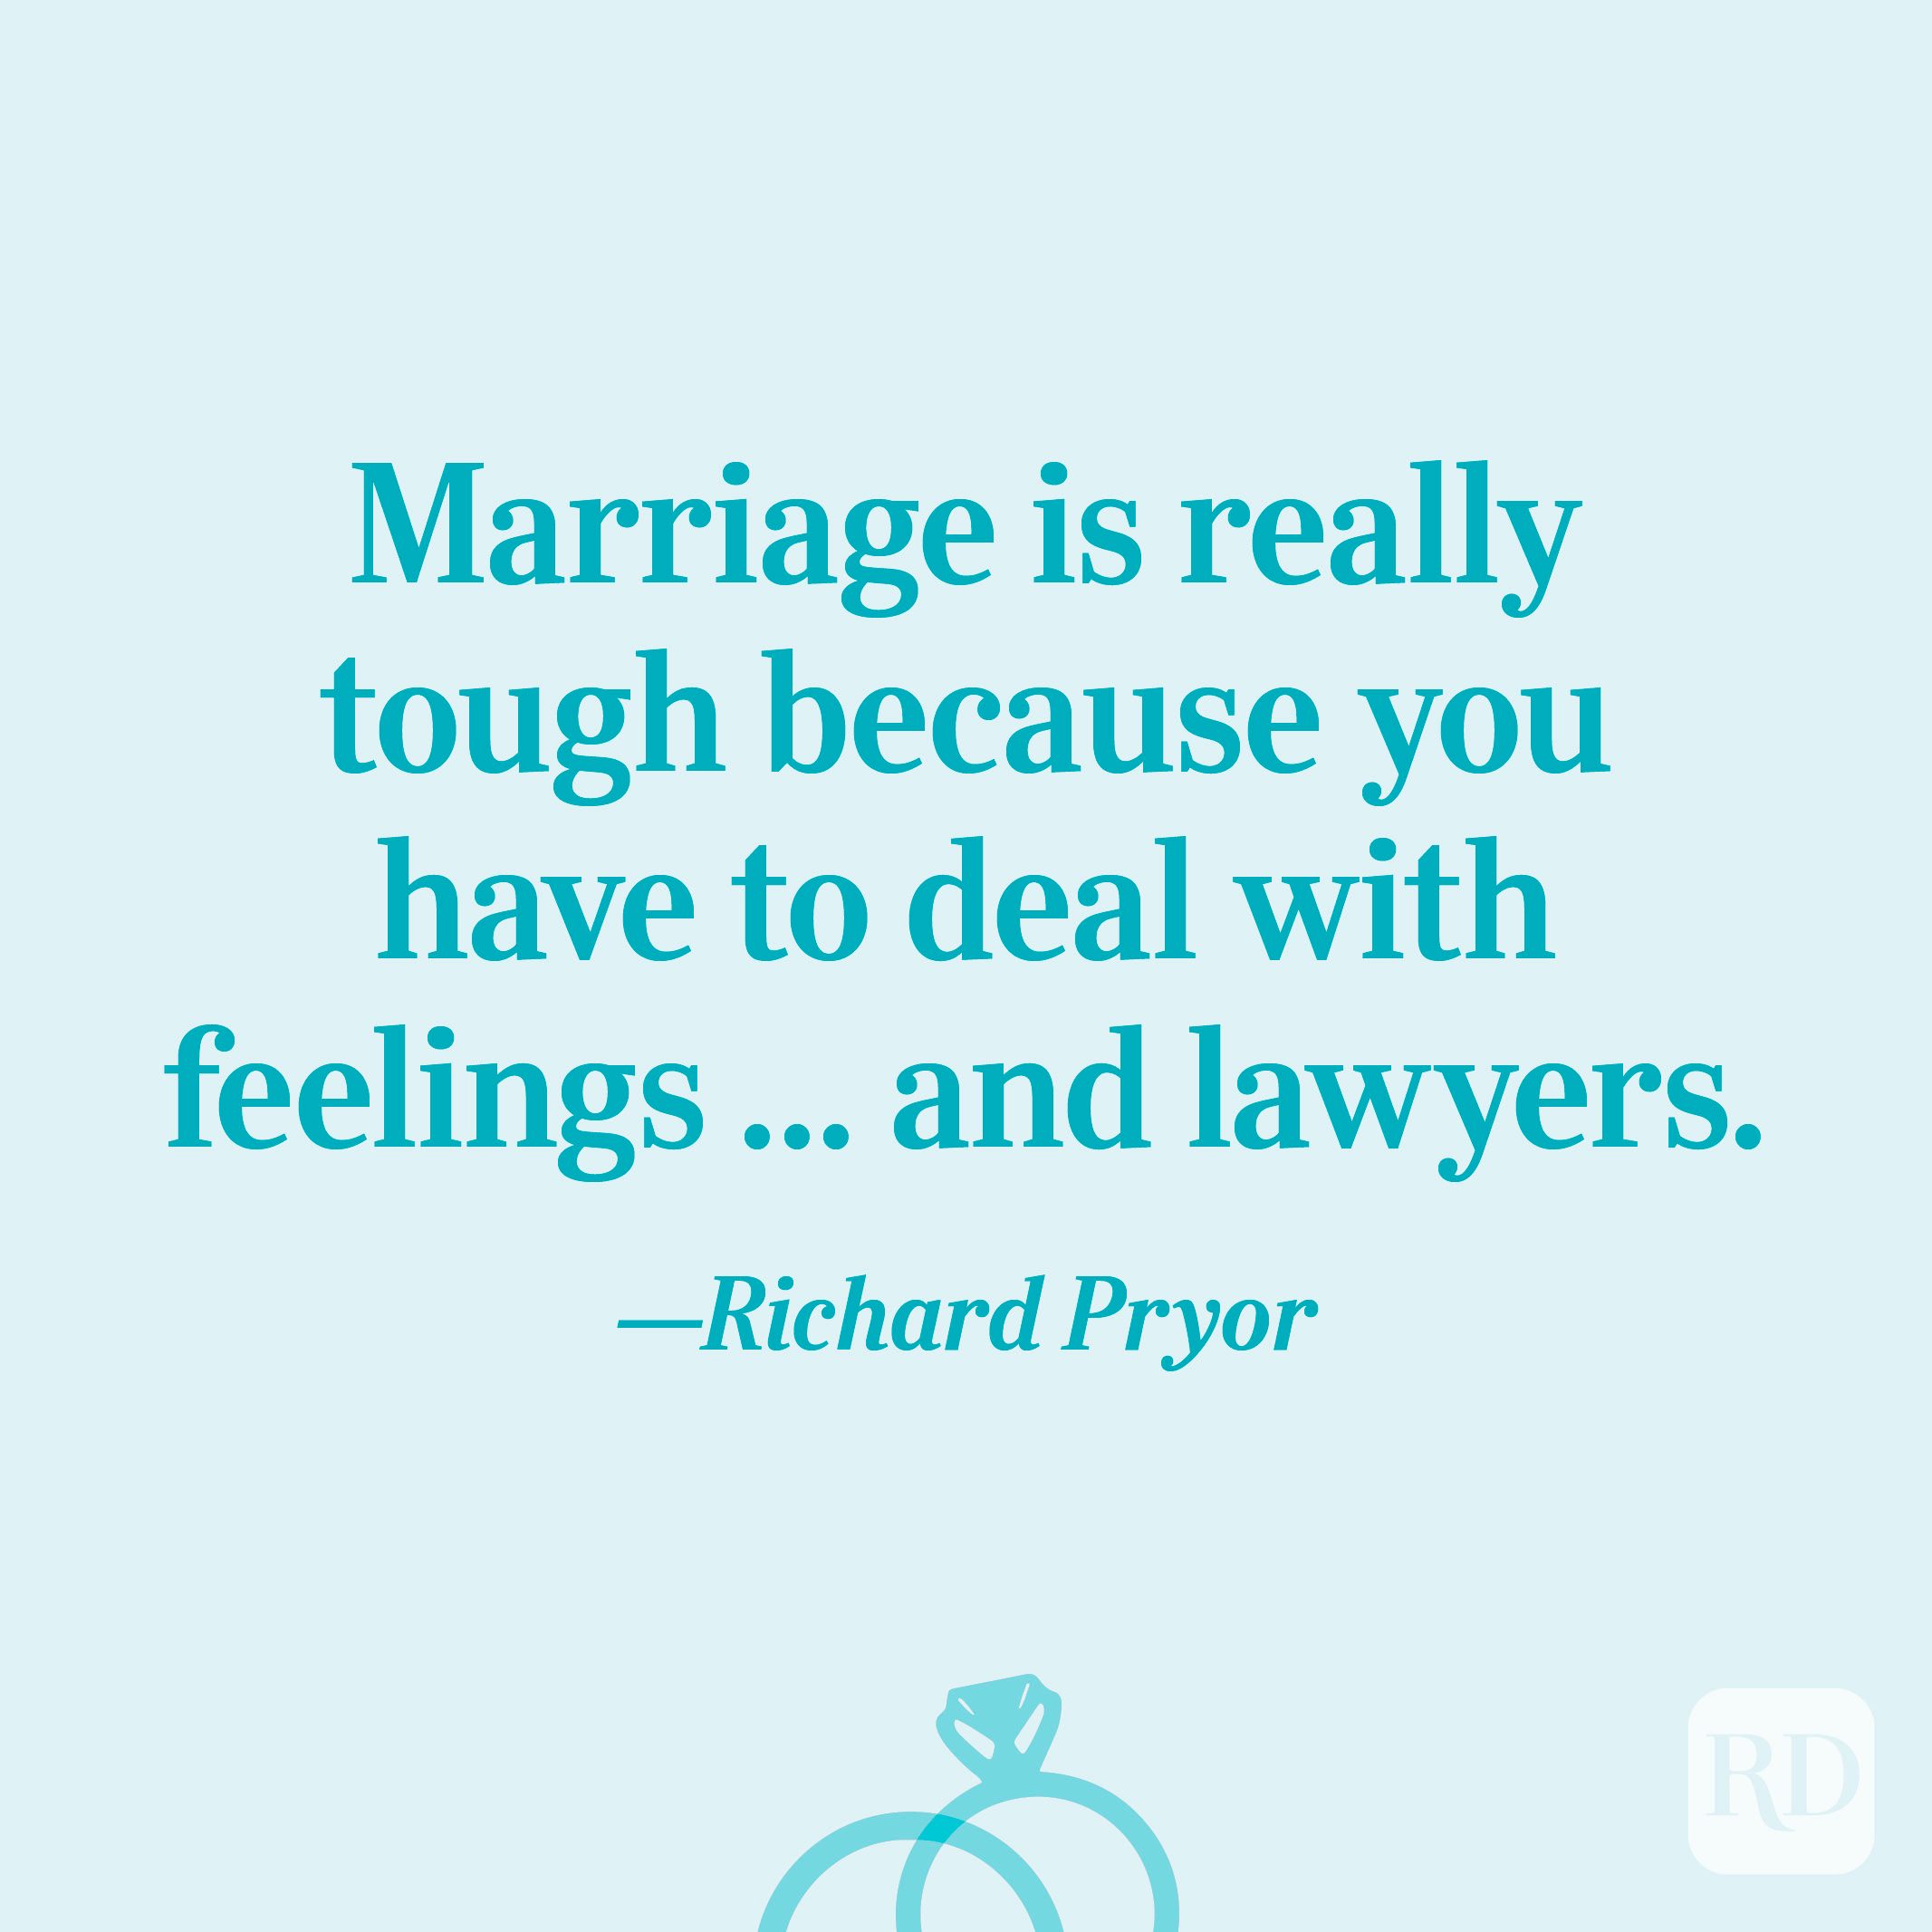 “Marriage is really tough because you have to deal with feelings ... and lawyers.”—Richard Pryor